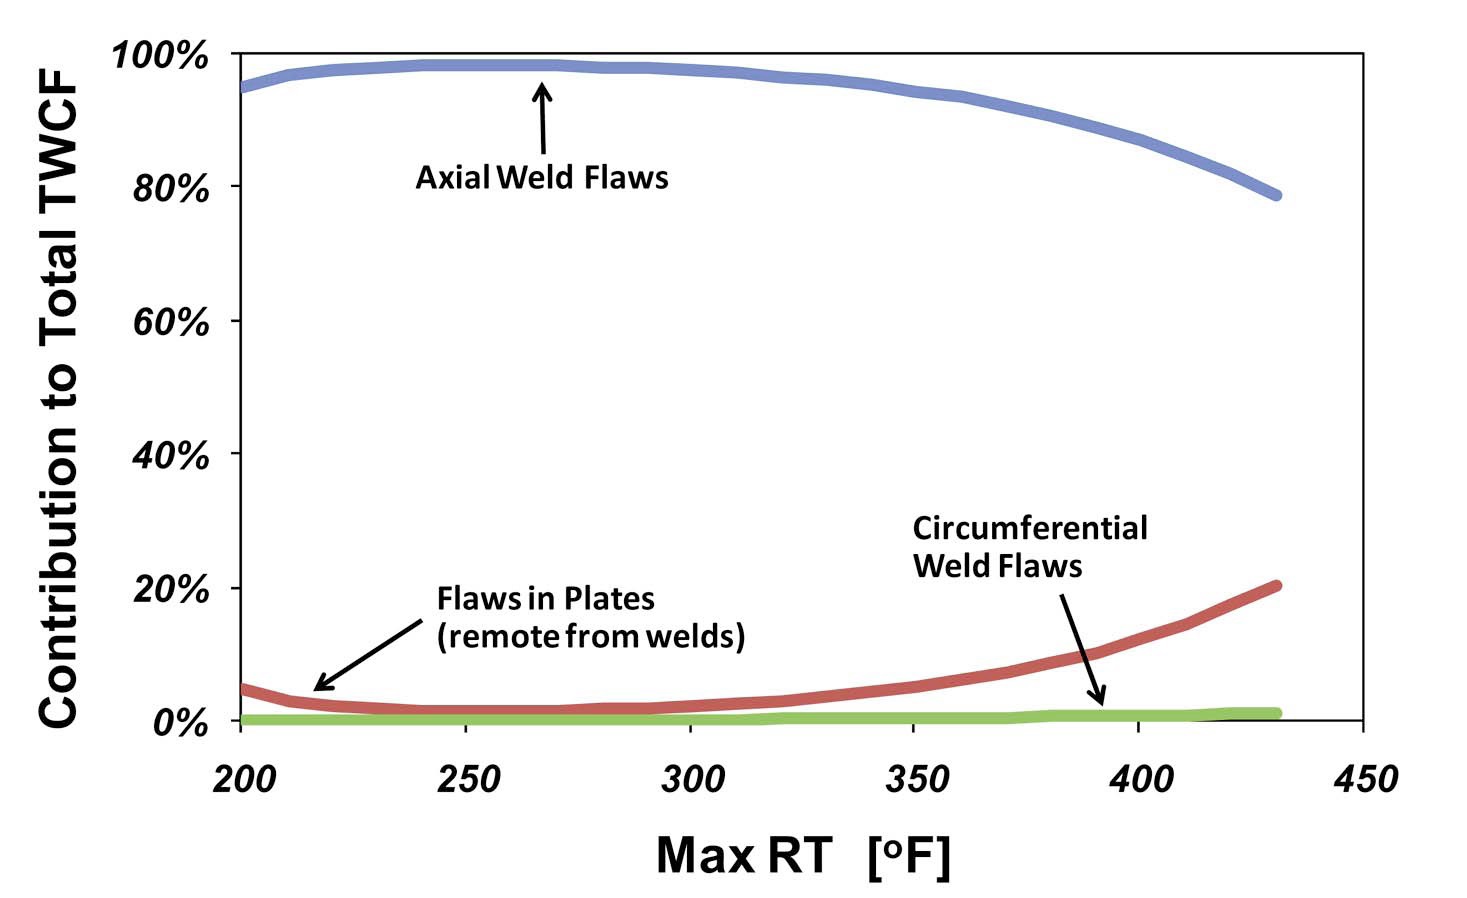 An Overlay of the Curve Fits from Fig. 5 Showing How, at Equivalent Embrittlement Levels, the TWCF Produced by Axial Weld Flaws Far Exceeds that Produced by Either Flaws in Plates, or by Flaws in Circumferential Welds.